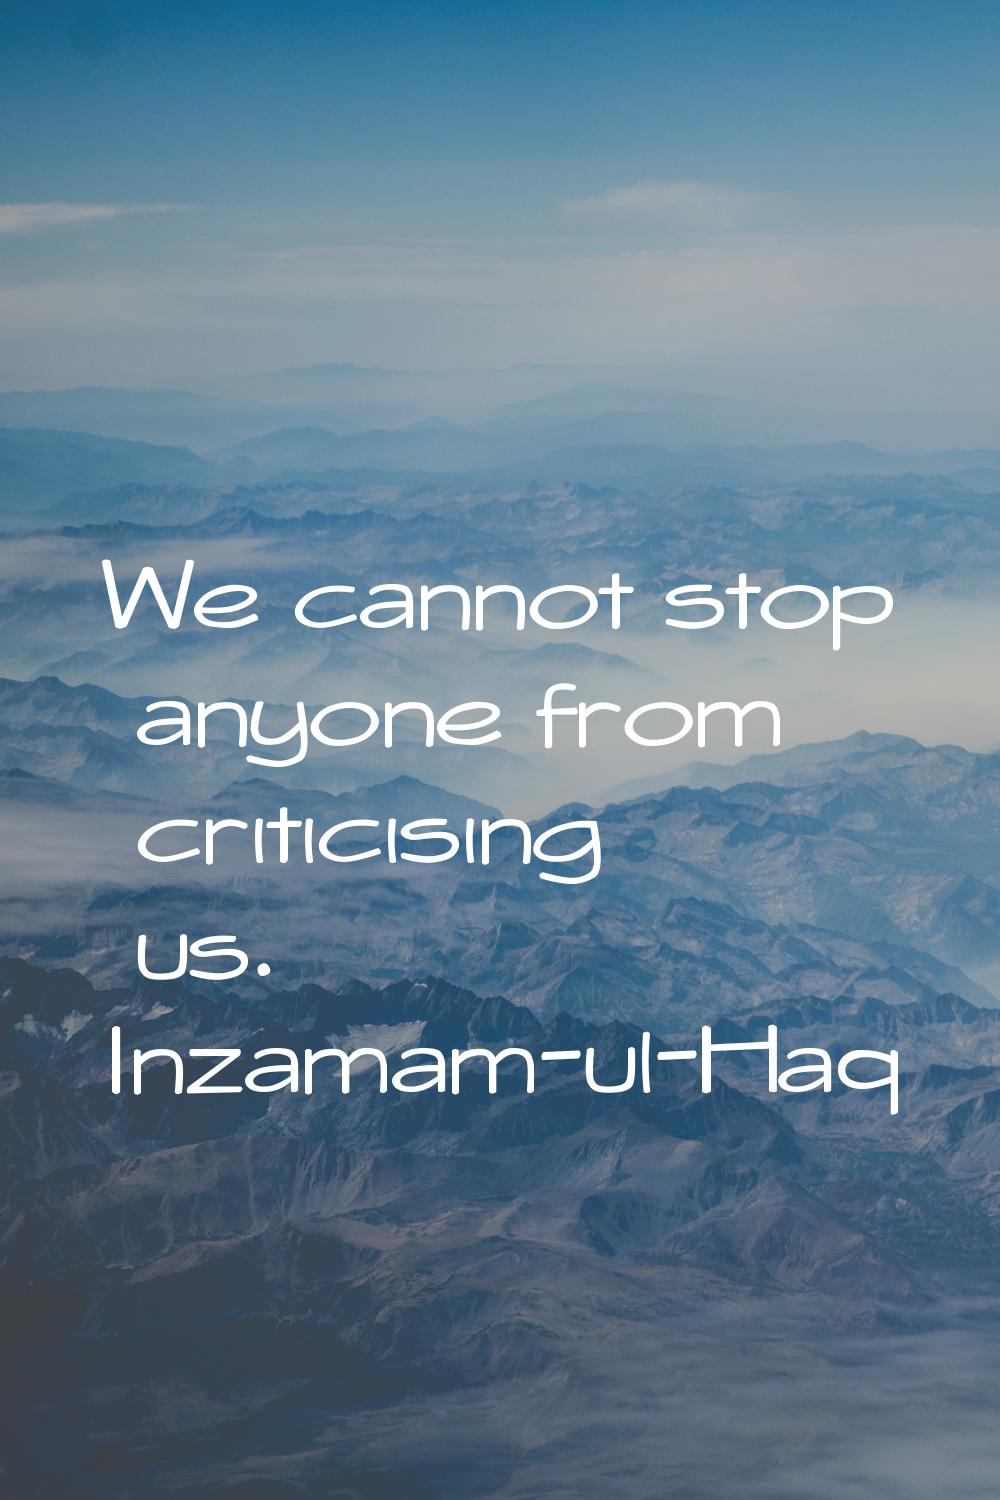 We cannot stop anyone from criticising us.